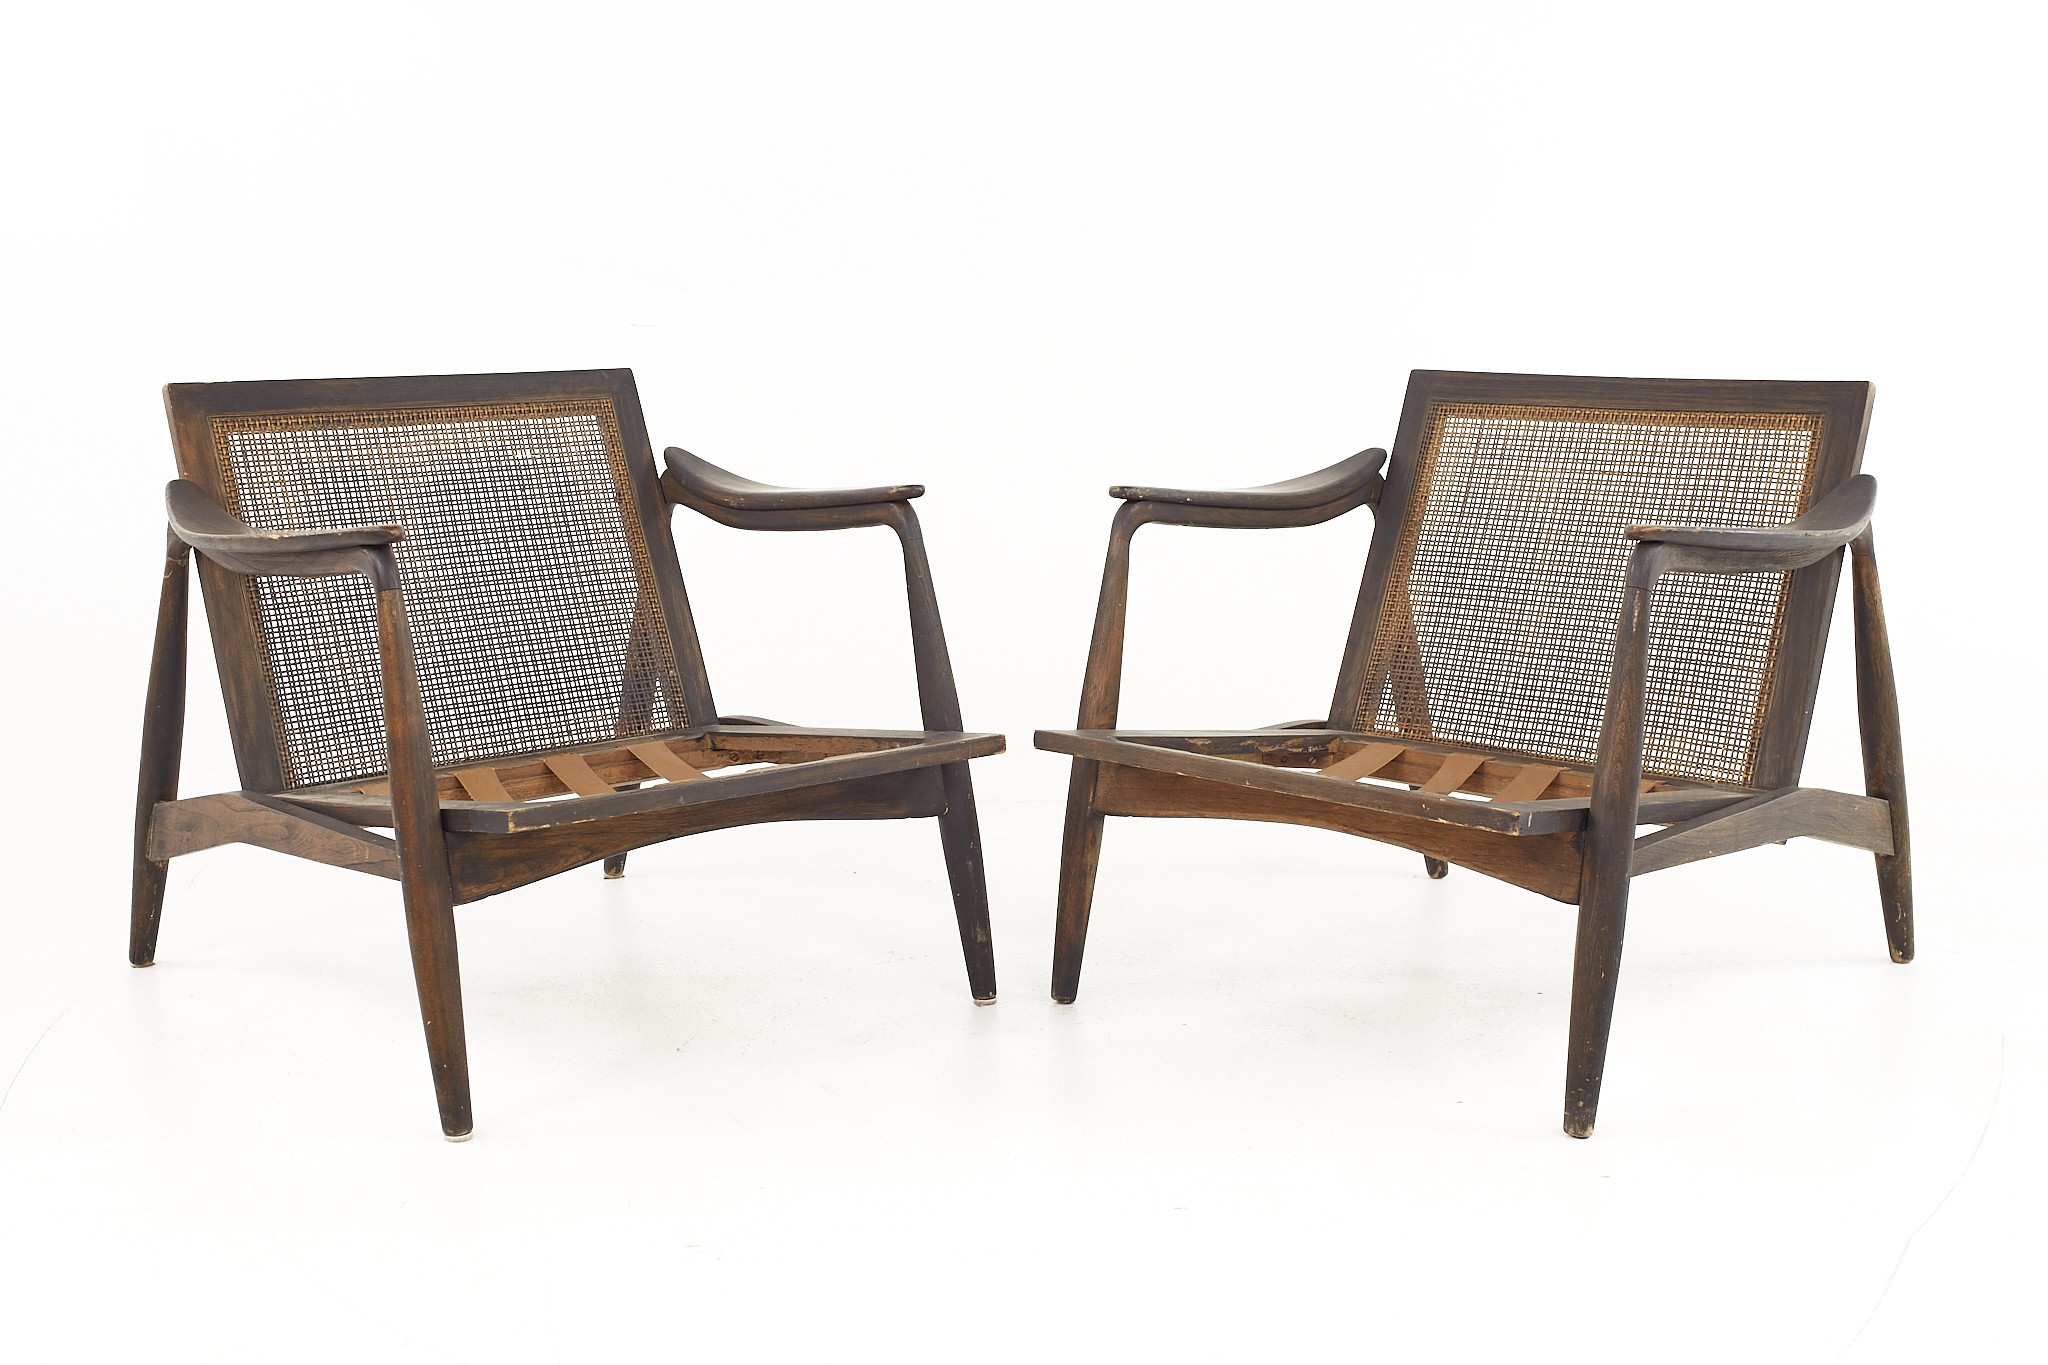 Lawrence Peabody for Richardson Nemschoff Mid Century Ebonized Walnut and Cane Lounge Chairs - a Pair